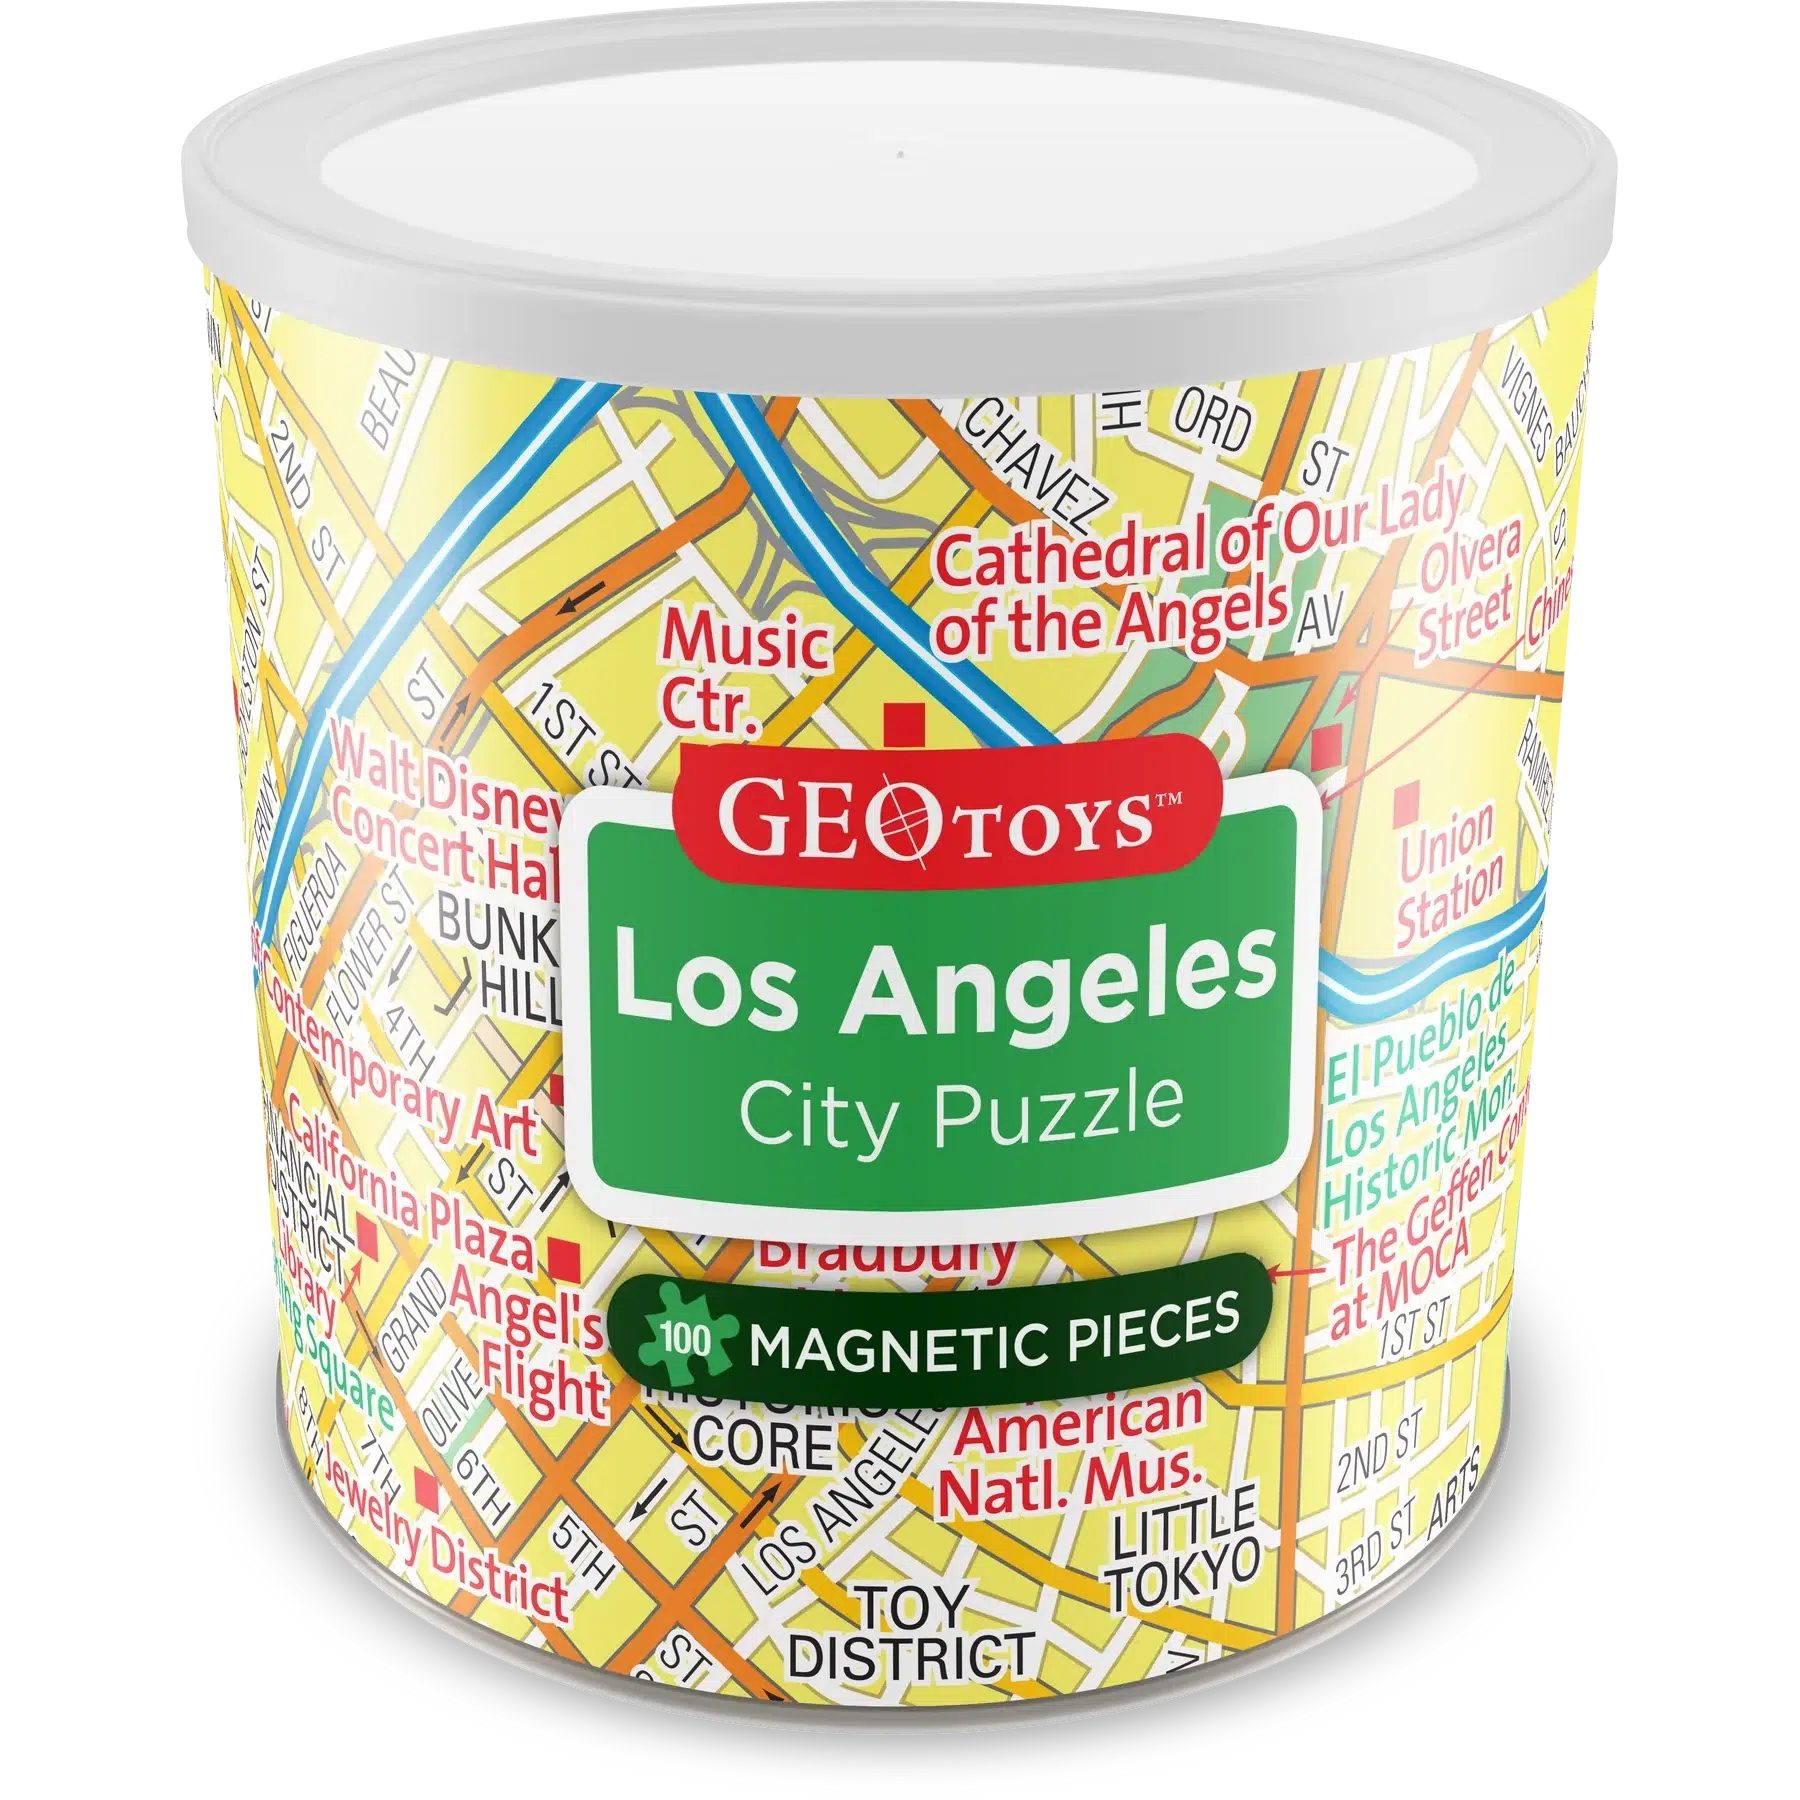 Los Angeles City 100 Piece Magnetic Jigsaw Puzzle Geotoys